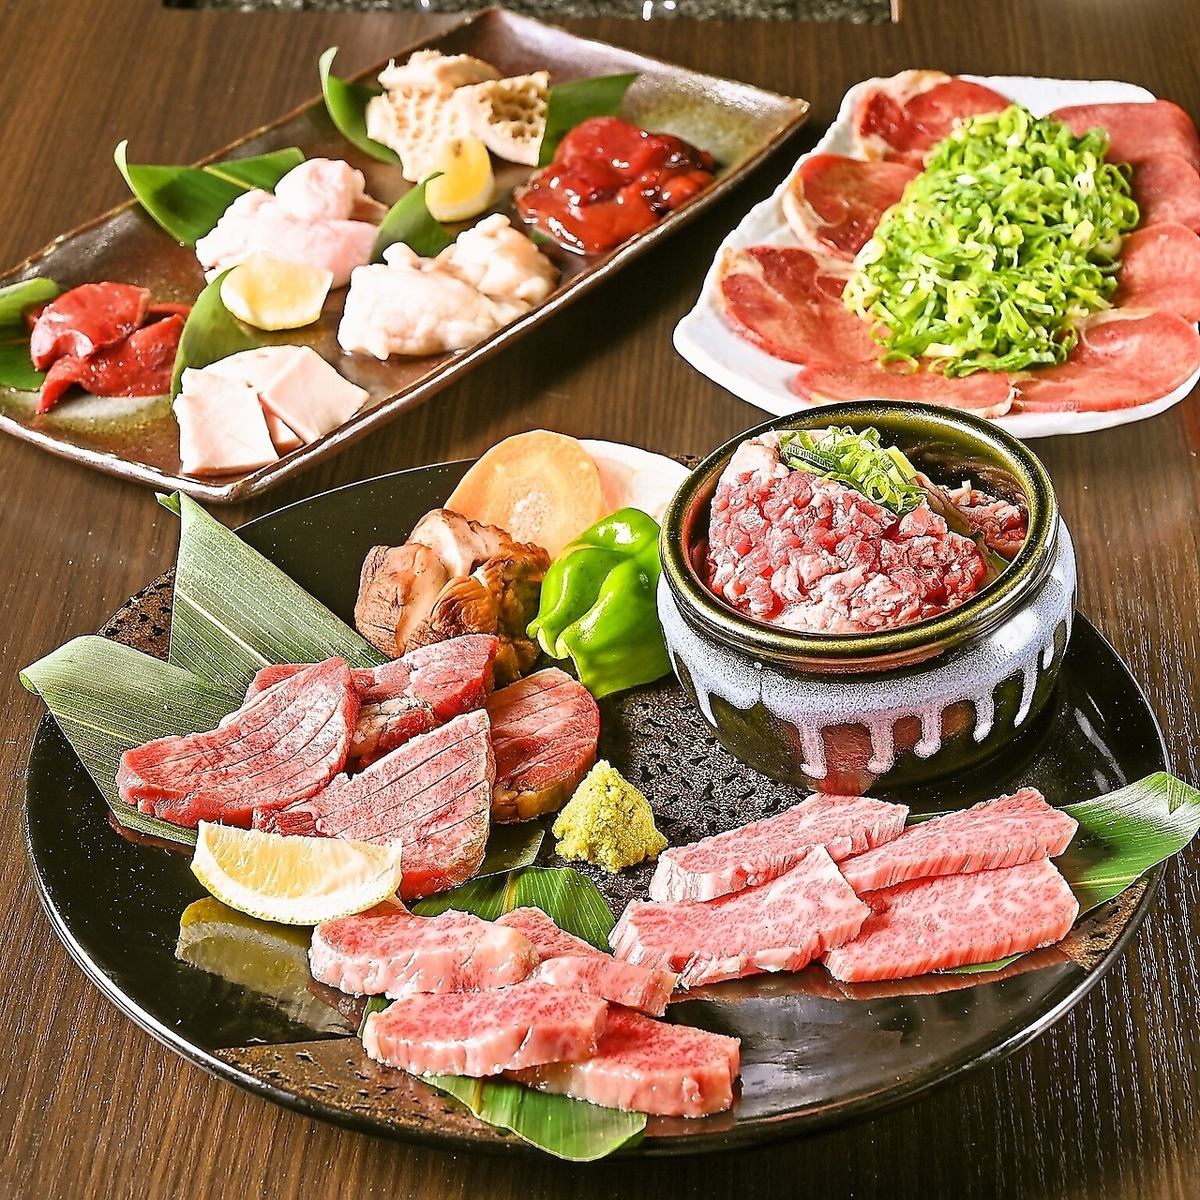 Enjoy Yakiniku at Meat Wholesaler Piccolo for a meal with your family and friends!